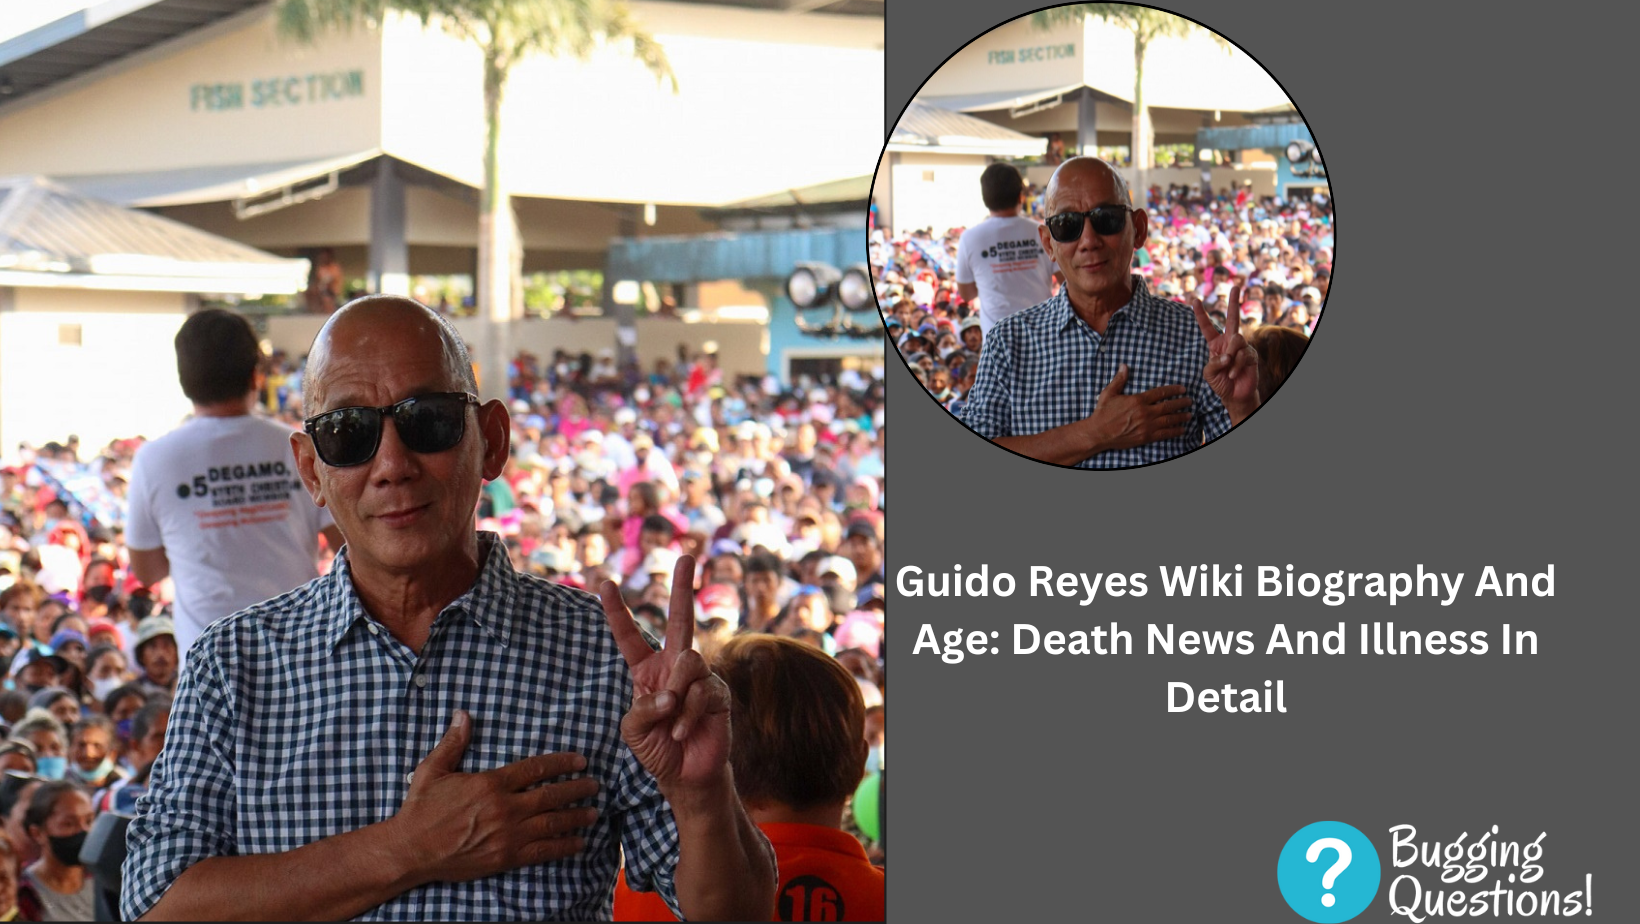 Guido Reyes Wiki Biography And Age